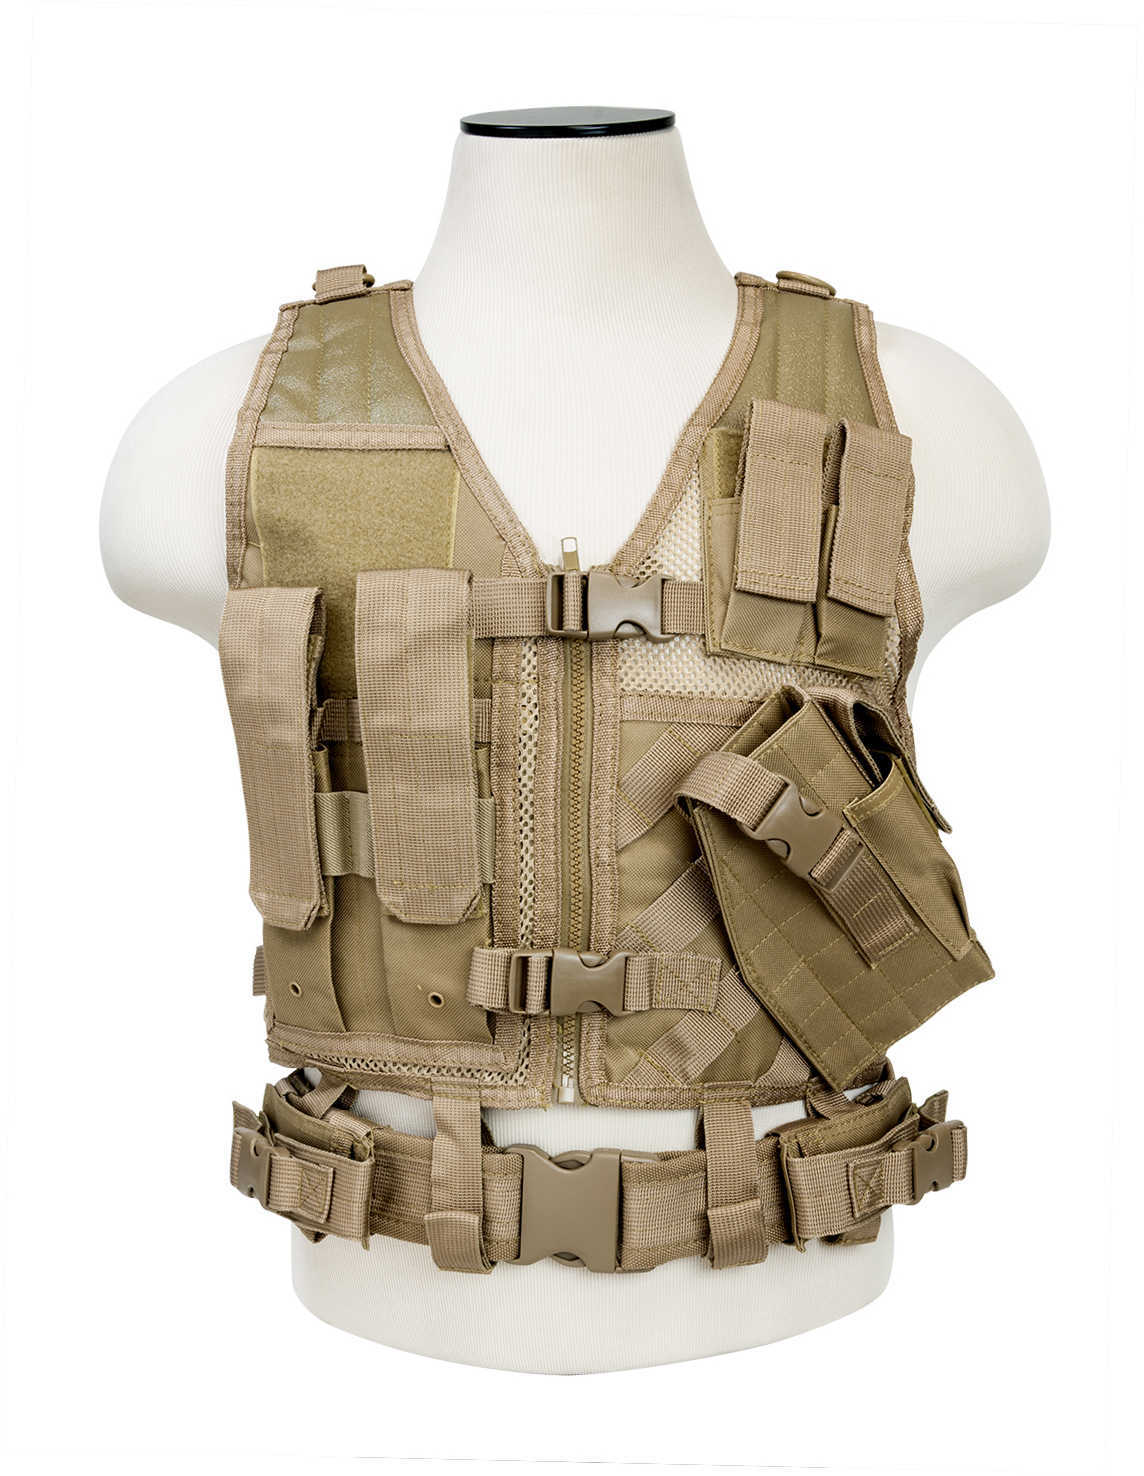 NCSTAR Tactical Vest Nylon Tan Size XS- Small Fully Adjustable PALS Webbing Pistol Mag Pouches Rifle Include